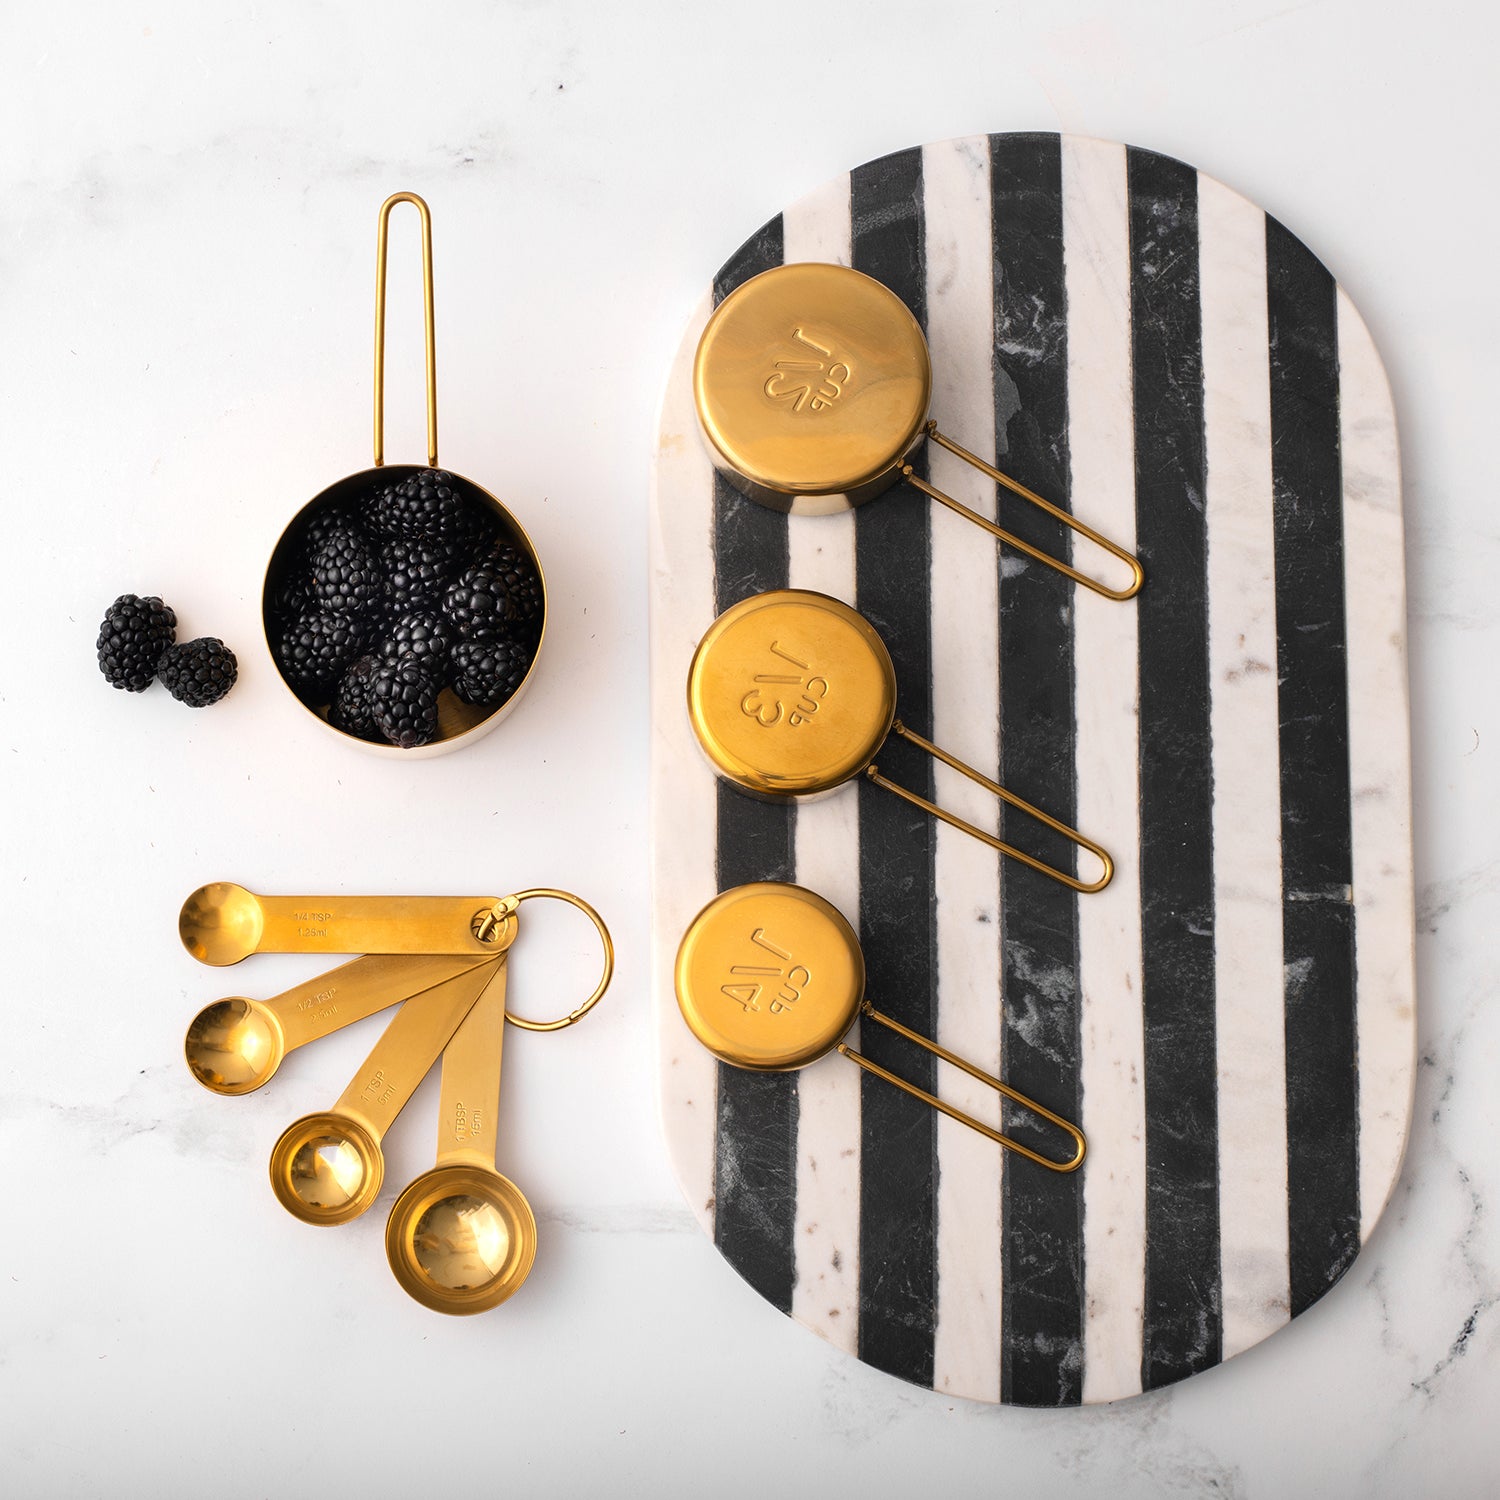 Gold Measuring Cups and Spoons Set - Styled Settings